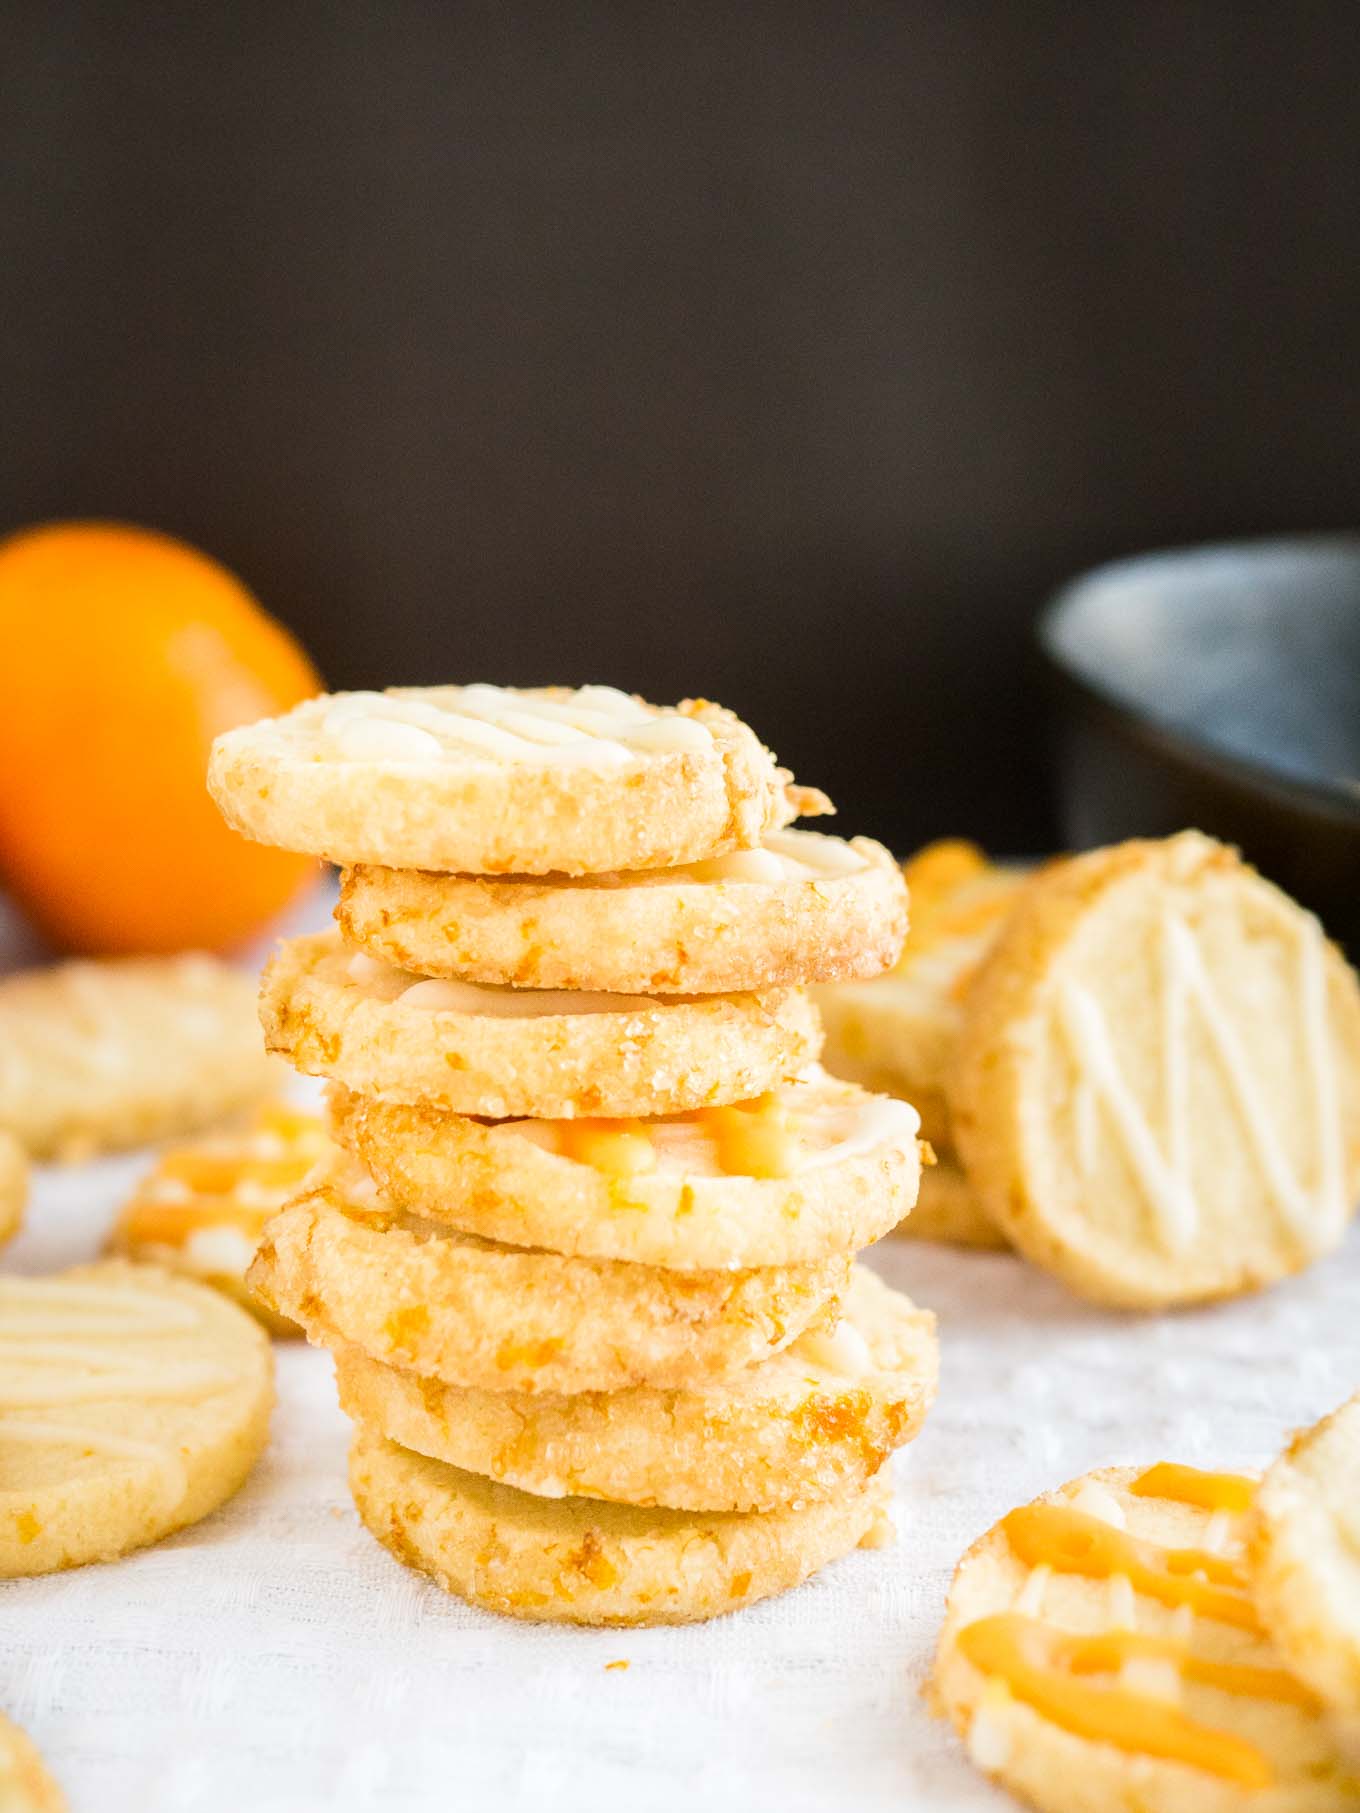 These Slice & Bake Orange Almond Cookies are soft in the center and crunchy on the edges! A flavorful and easy-to-make cookie with lots of orange aroma and ground almonds.